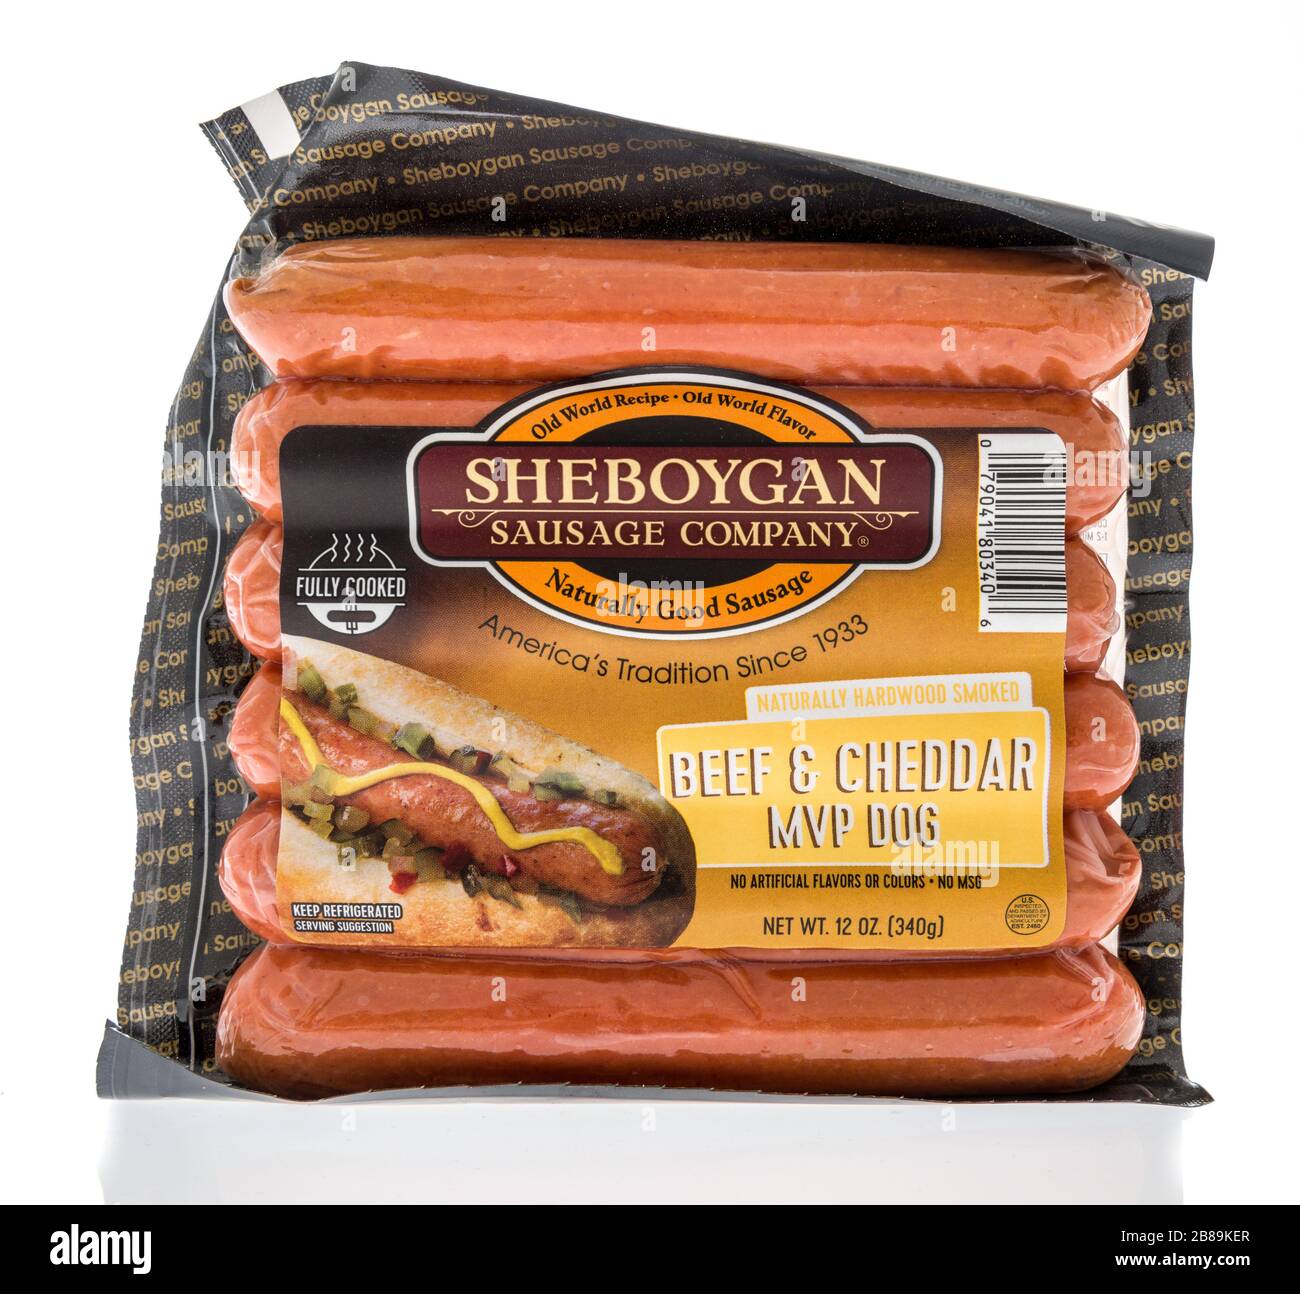 Winneconne,  WI - 12 March 2020:  A package of Sheboygan sausage company beef and cheddar mvp dog on an isolated background. Stock Photo